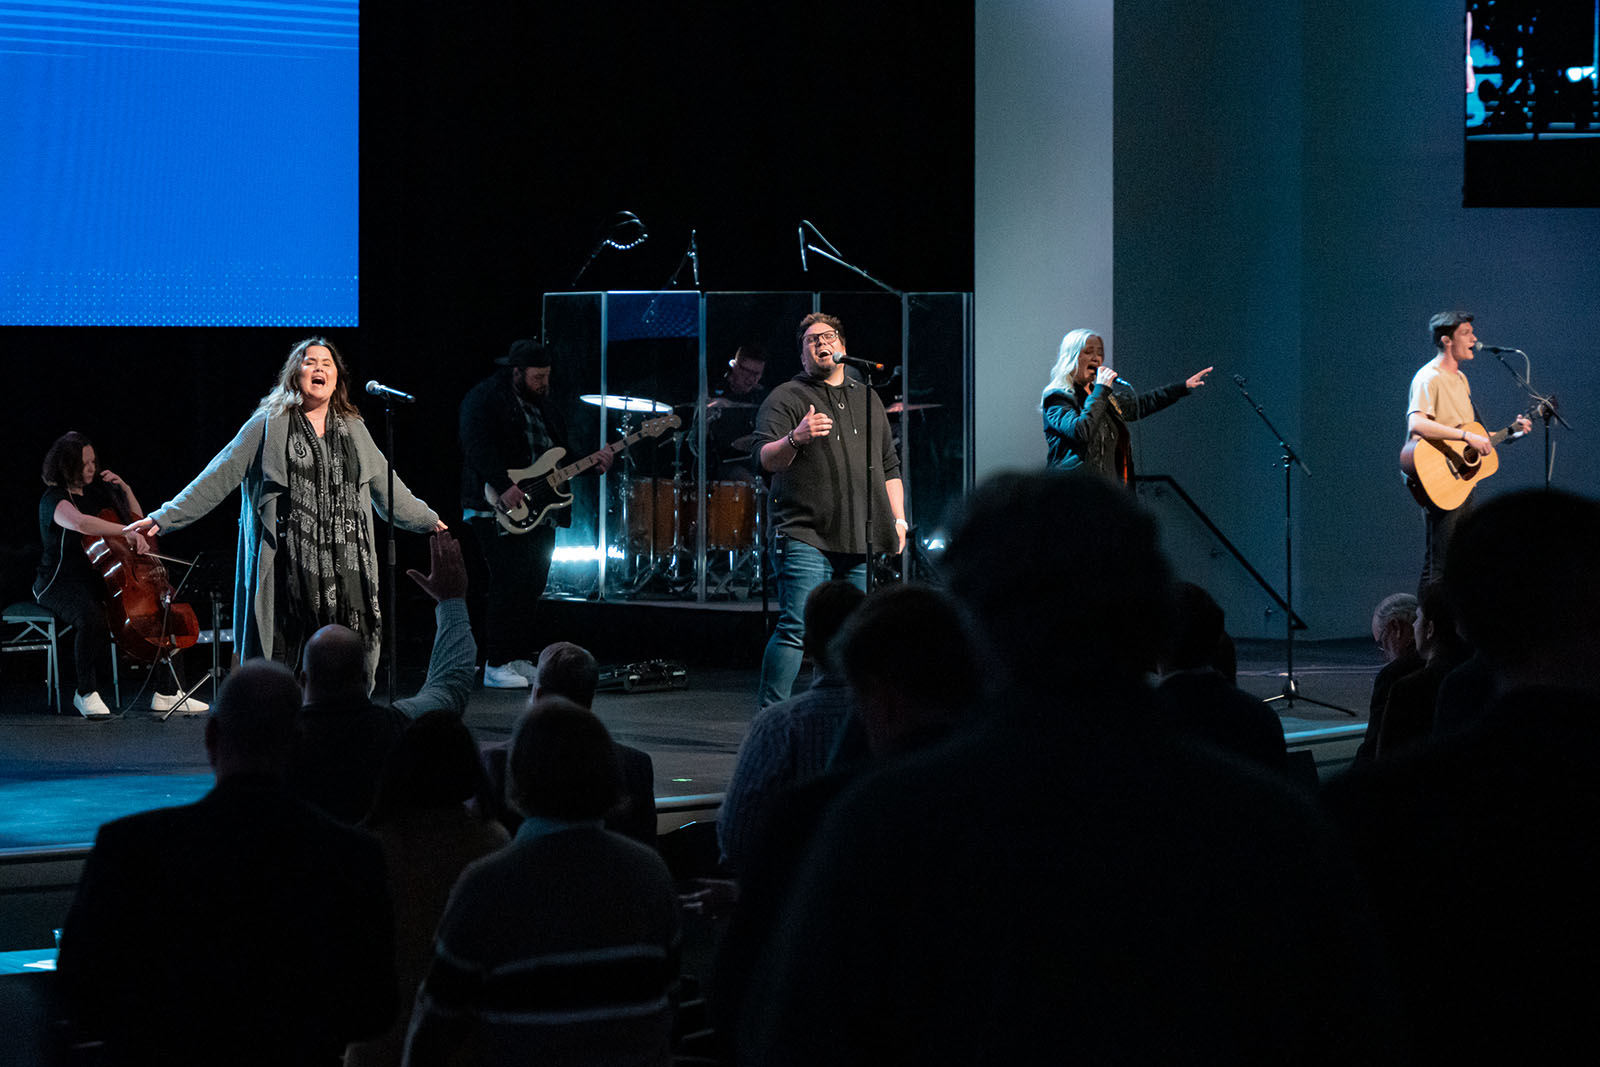 Messengers celebrate ministry at 2022 Annual Meeting